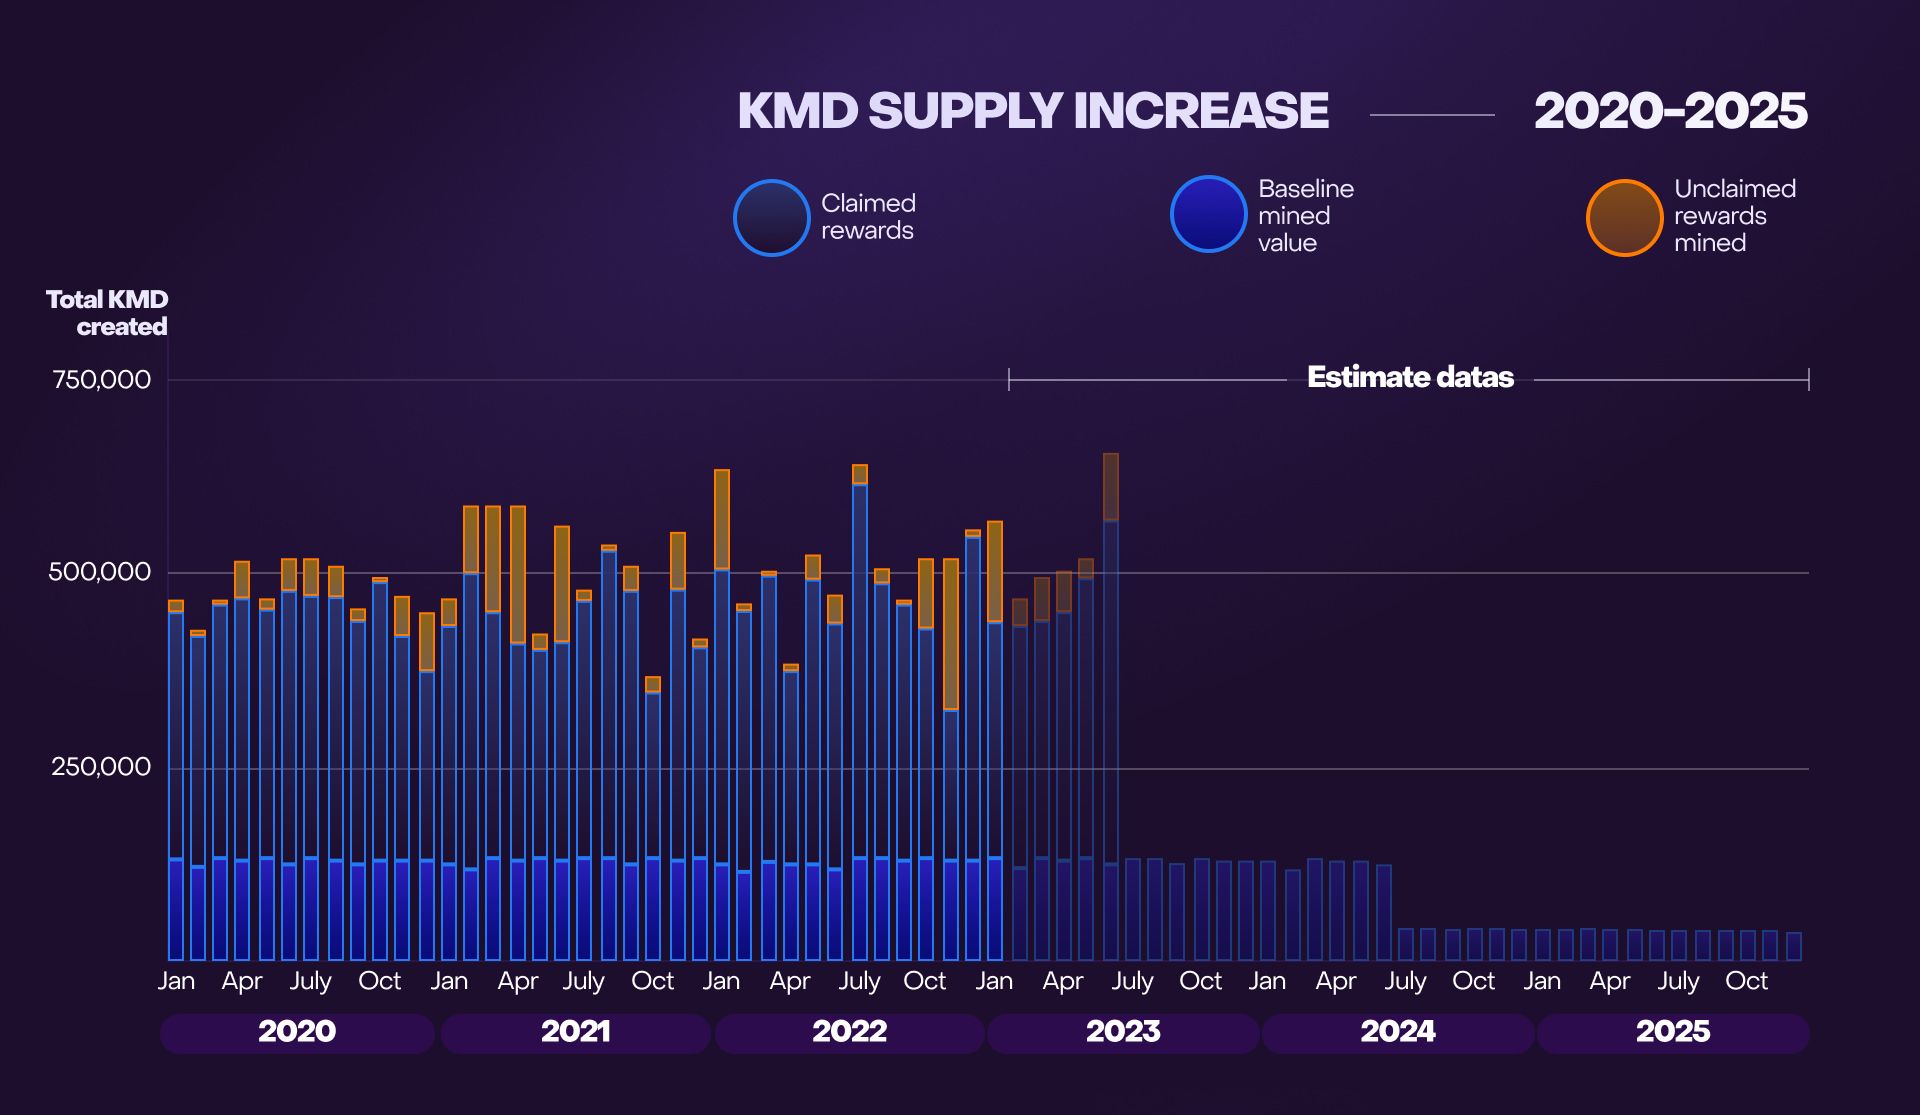 KMD supply before and after proposed tokenomics changes